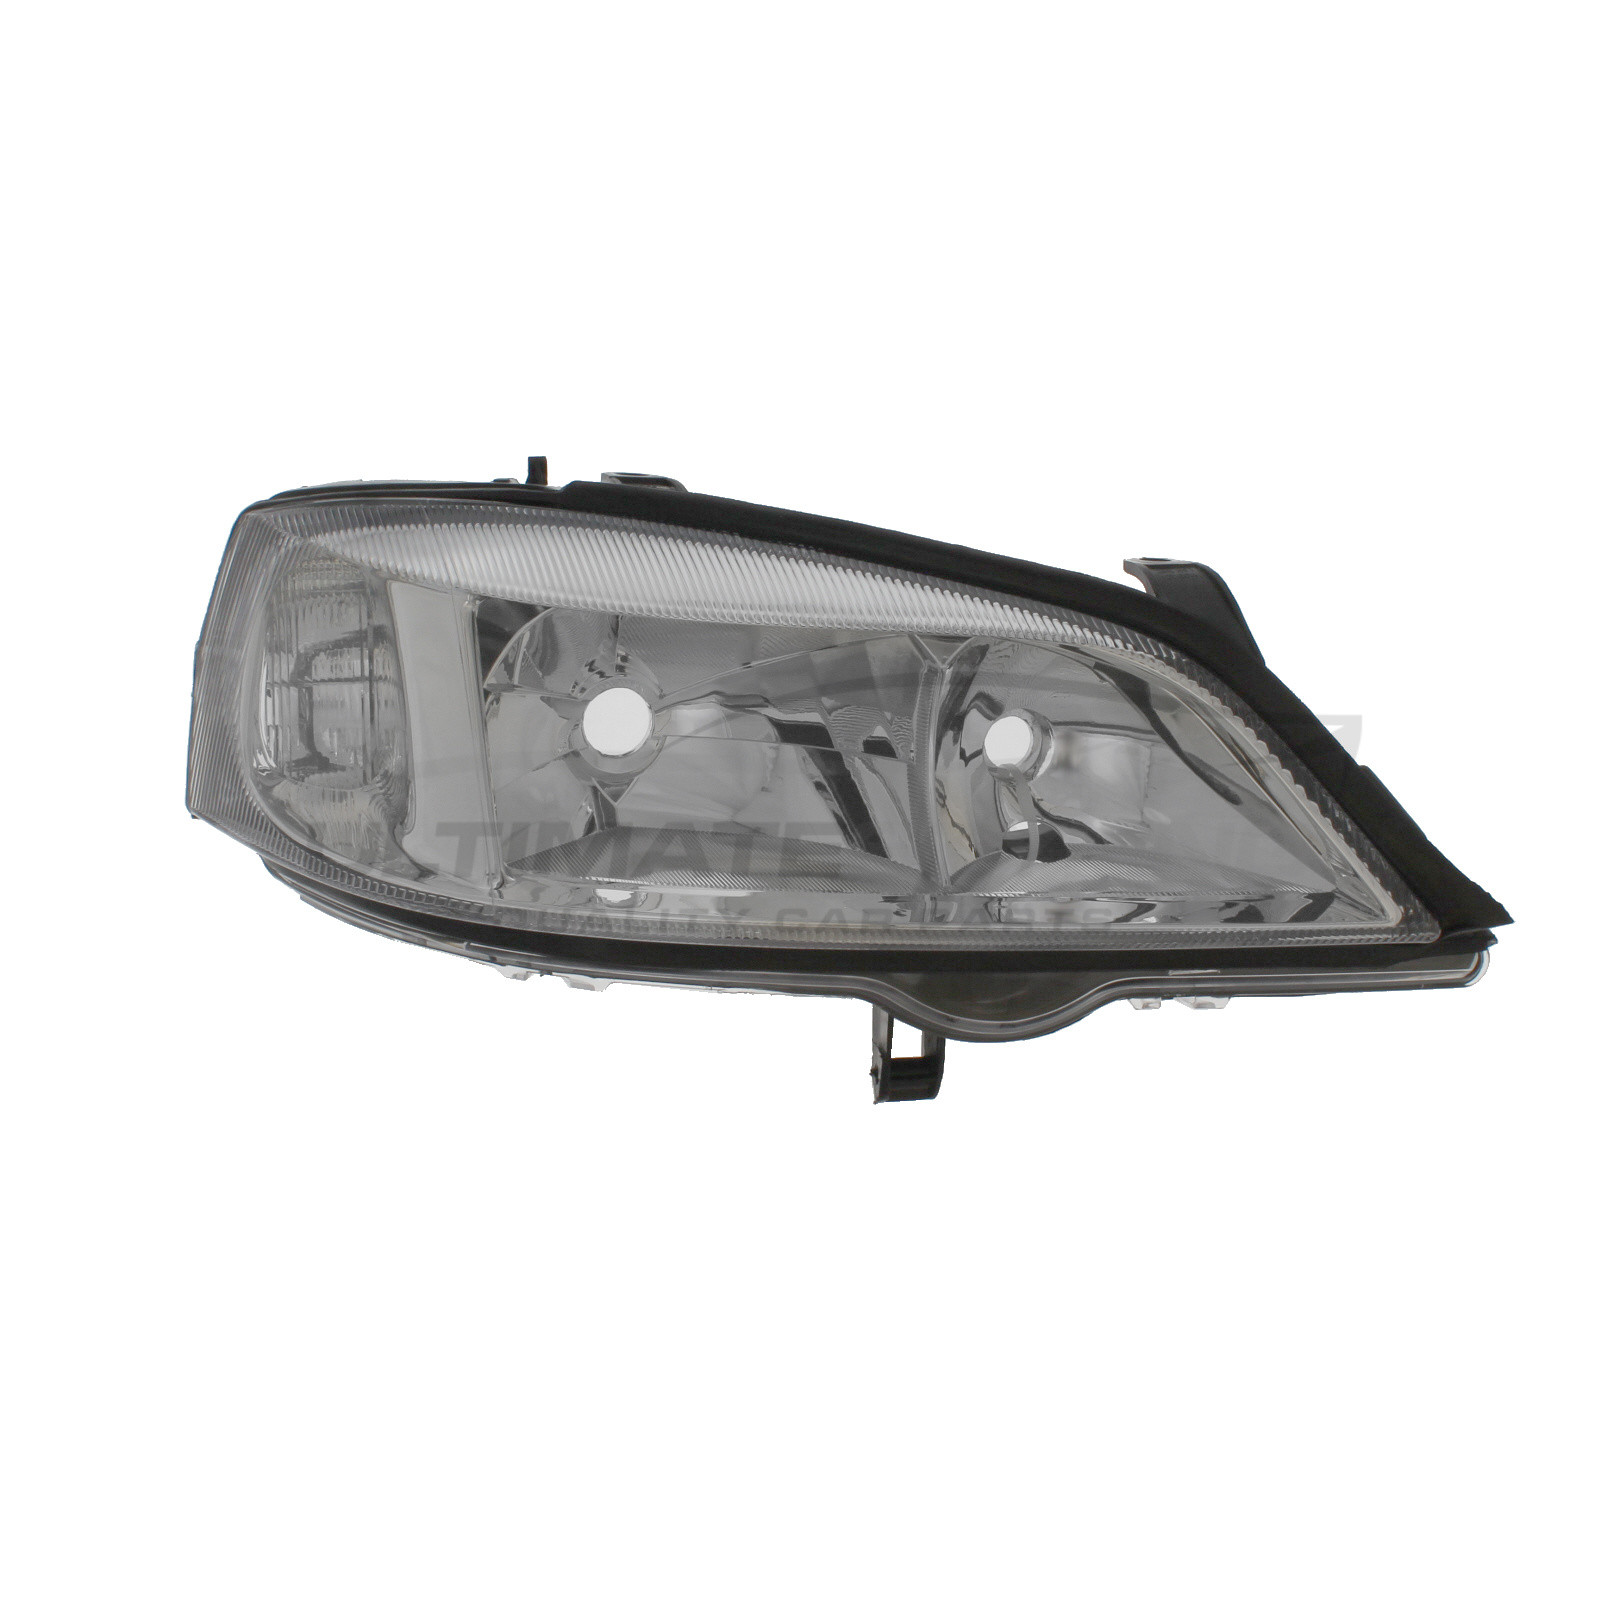 Vauxhall Astra G 1998-2004 Halogen, Electric Without Motor, Headlight / Headlamp with Chrome Surround Drivers Side (RH)